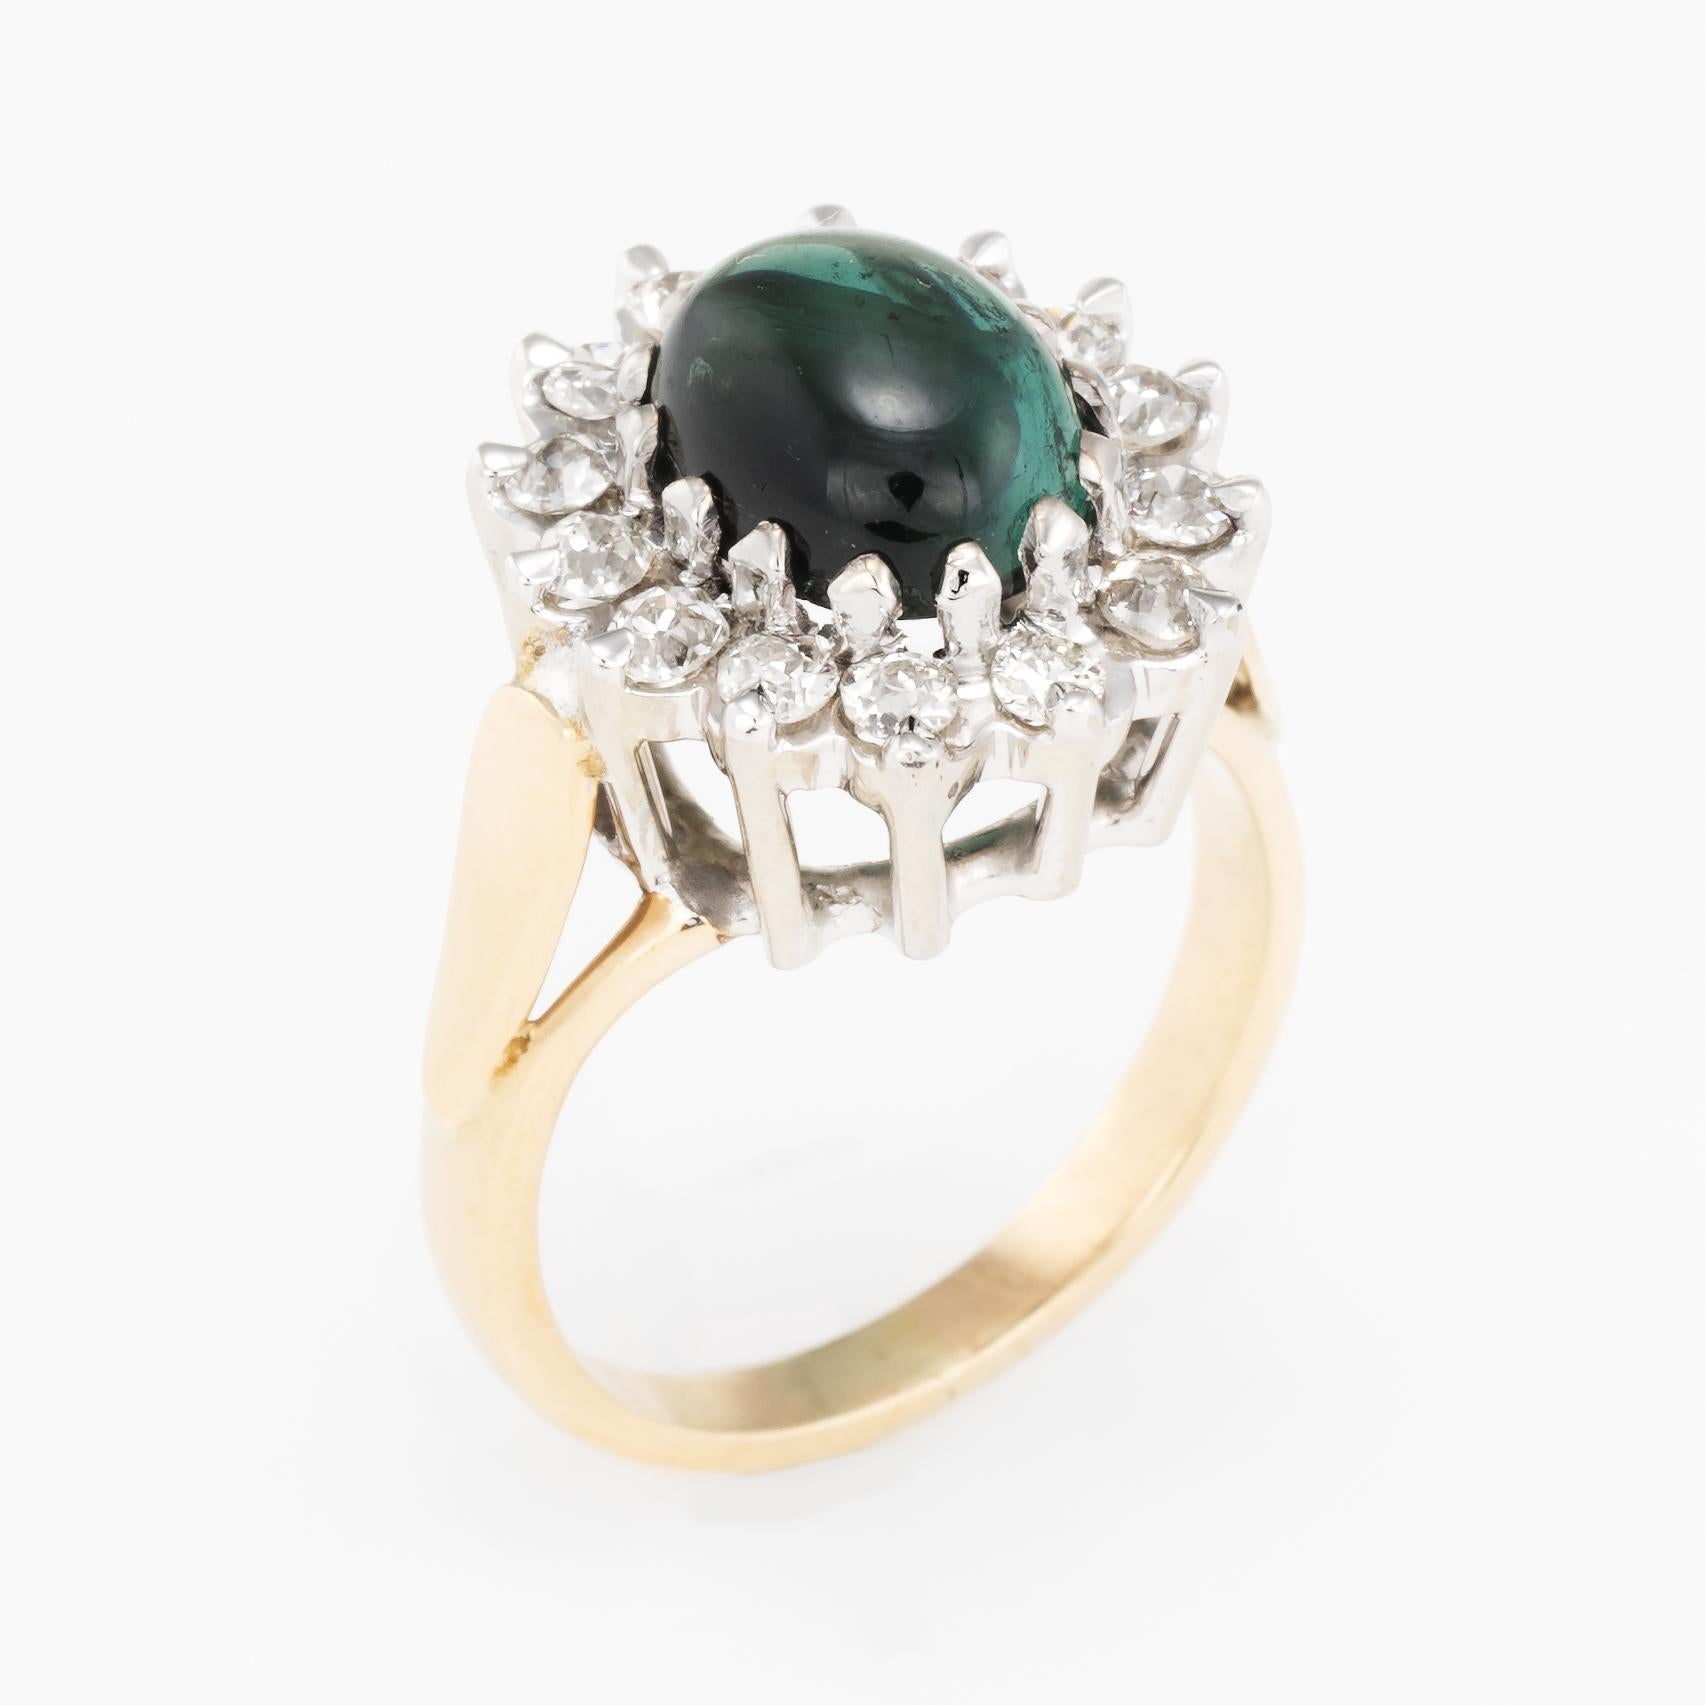 Elegant vintage princess cocktail ring, crafted in 14 karat yellow gold. 

Cabochon cut green tourmaline measures 9mm x 7mm (estimated at 2.25 carats), accented with an estimated 0.56 carats of old mine cut diamonds (estimated at H color and SI1-2